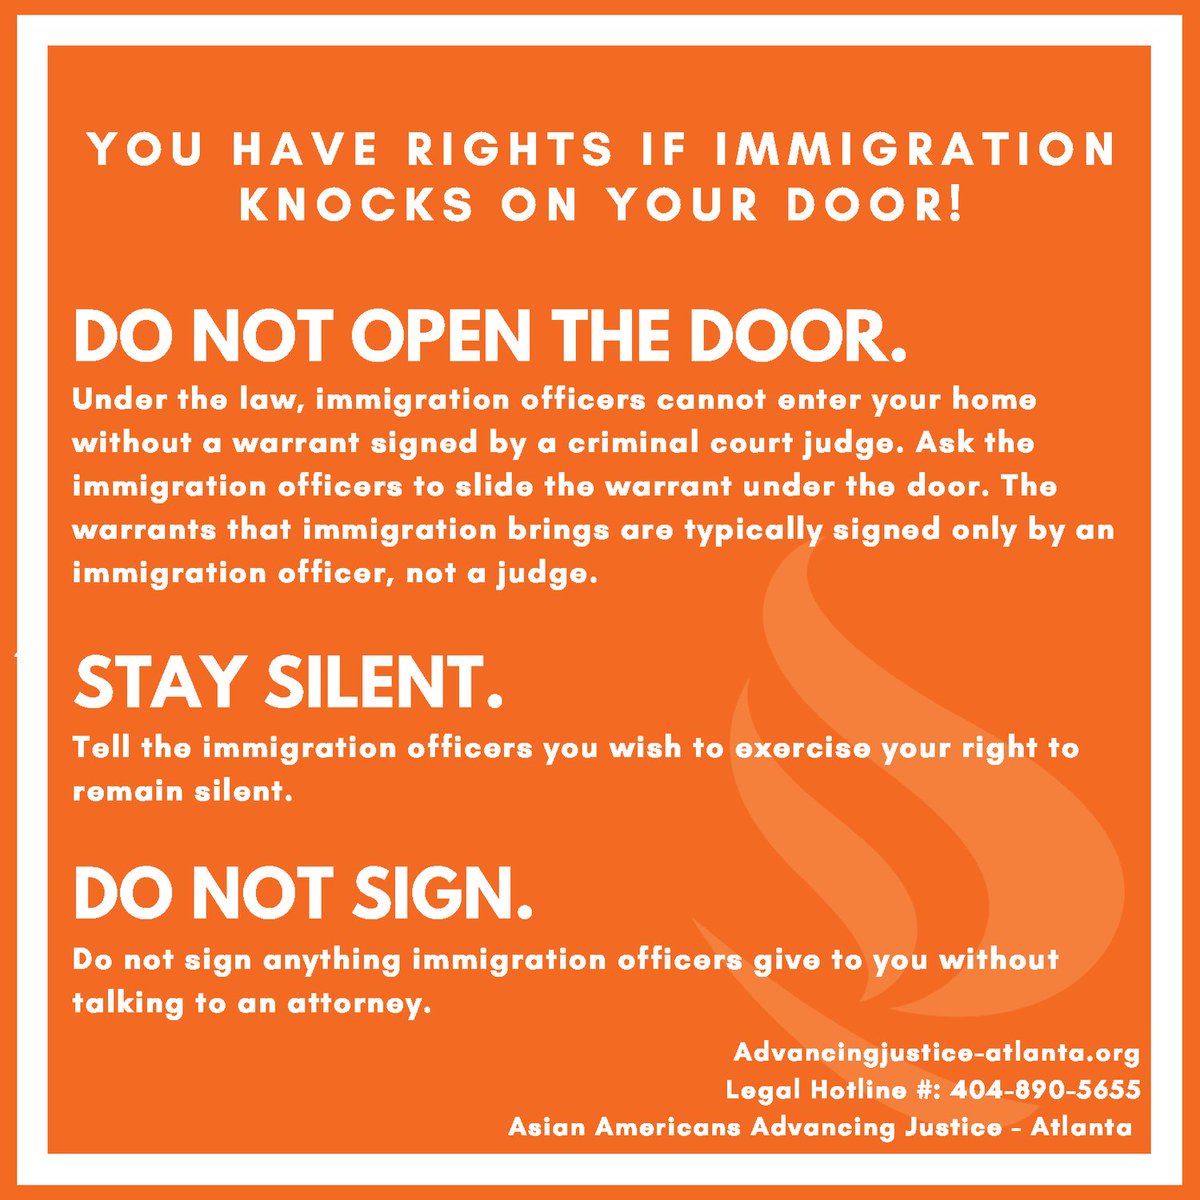 🔊Know Your Rights! Stay informed and empowered. Learn what your constitutional rights are if ICE comes to your door. Visit advancingjustice-atlanta.org/know-your-righ… for in-language resources and additional info. #ImmigrantRights #AdvancingJusticeATL